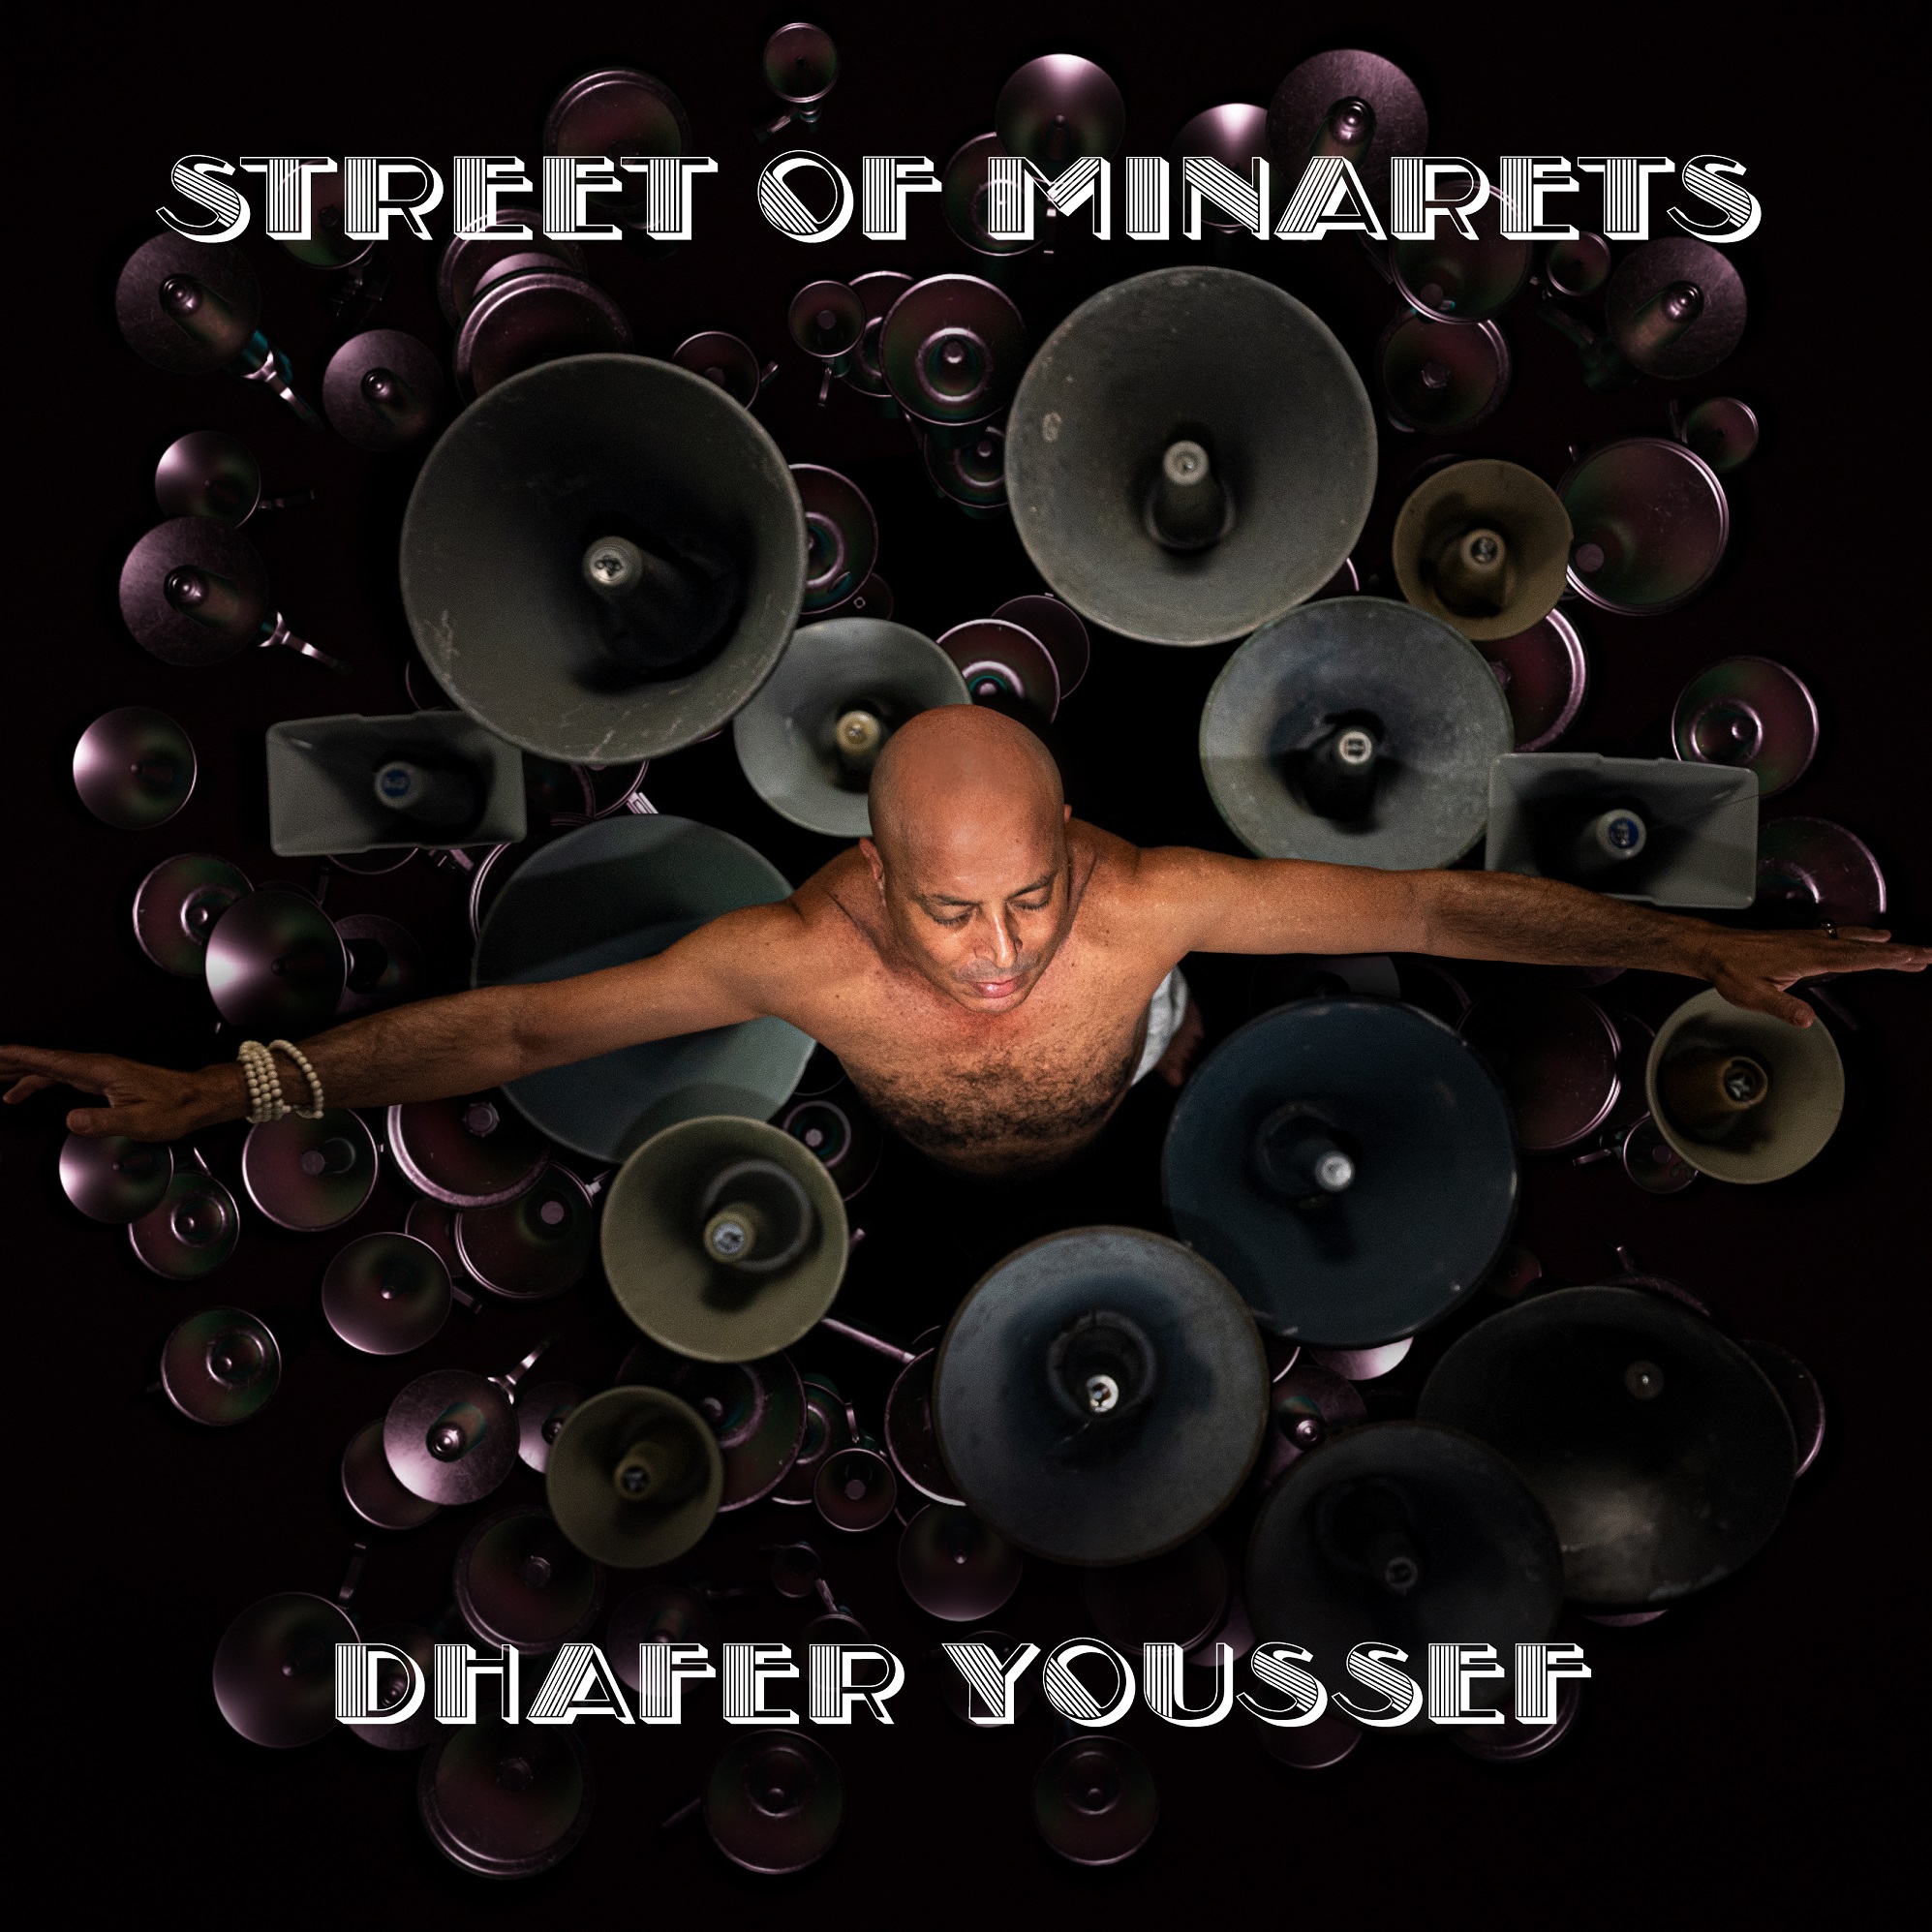 DHAFER YOUSSEF NEW ALBUM STREET OF MINARETS OUT NEXT WEEK